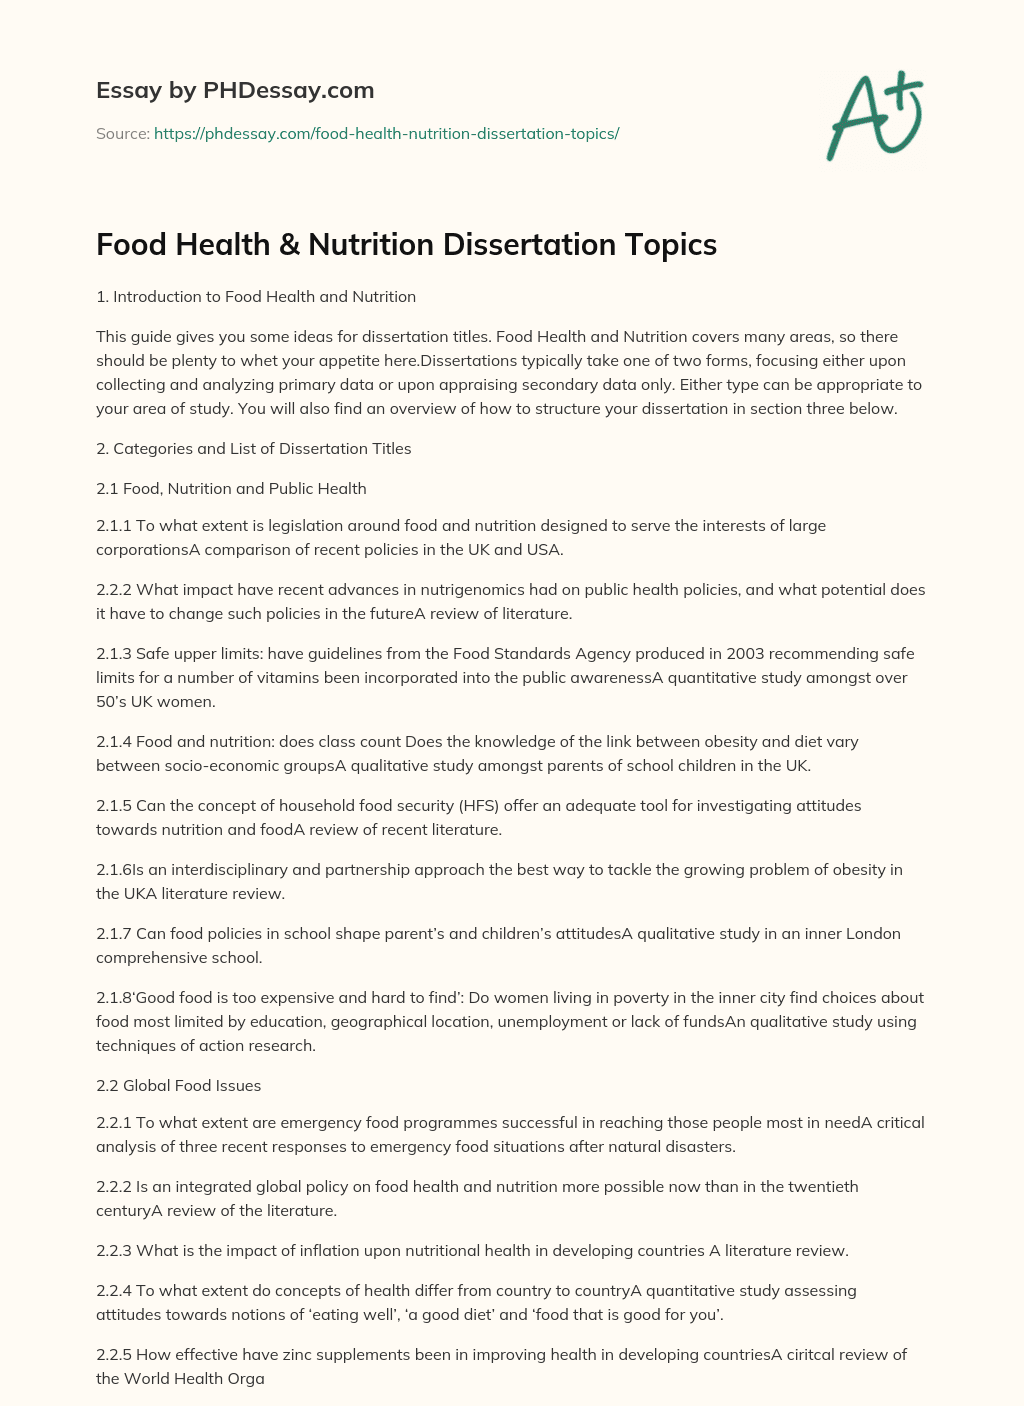 dissertation topics related to nutrition